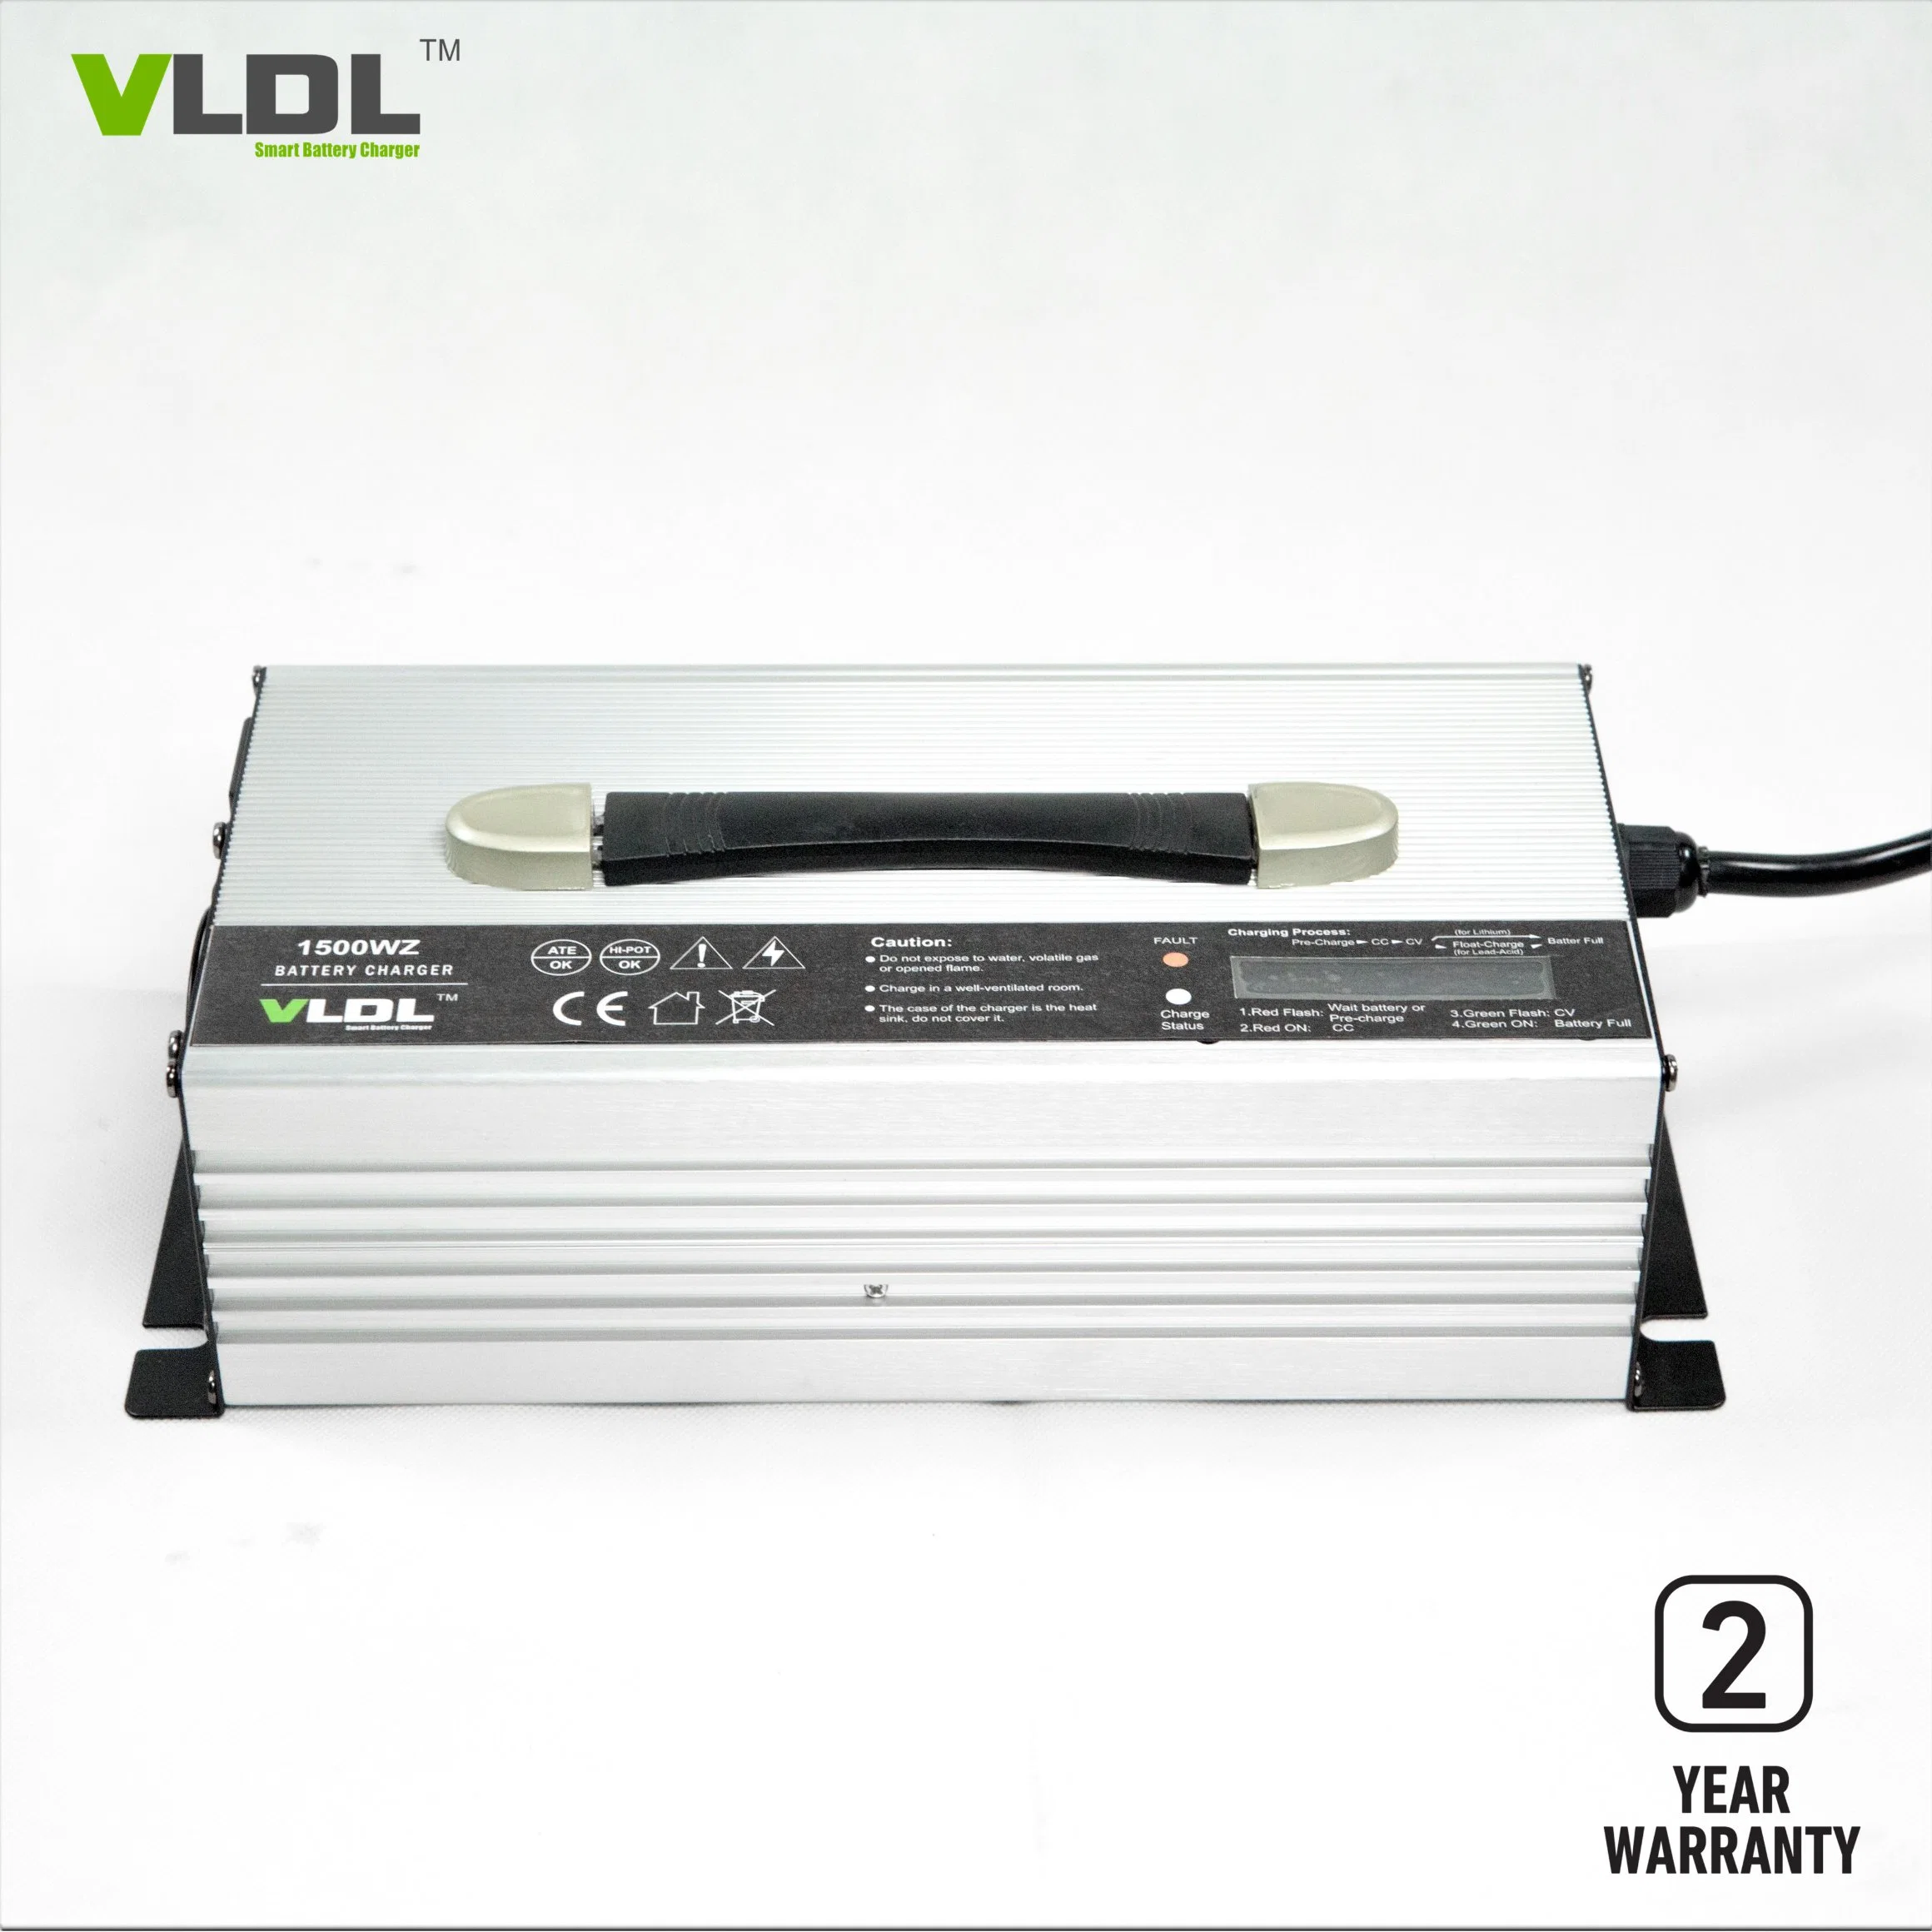 36V 30A Automatic Battery Charger, Designed for Lead-Acid Battery, 1500W Output Power